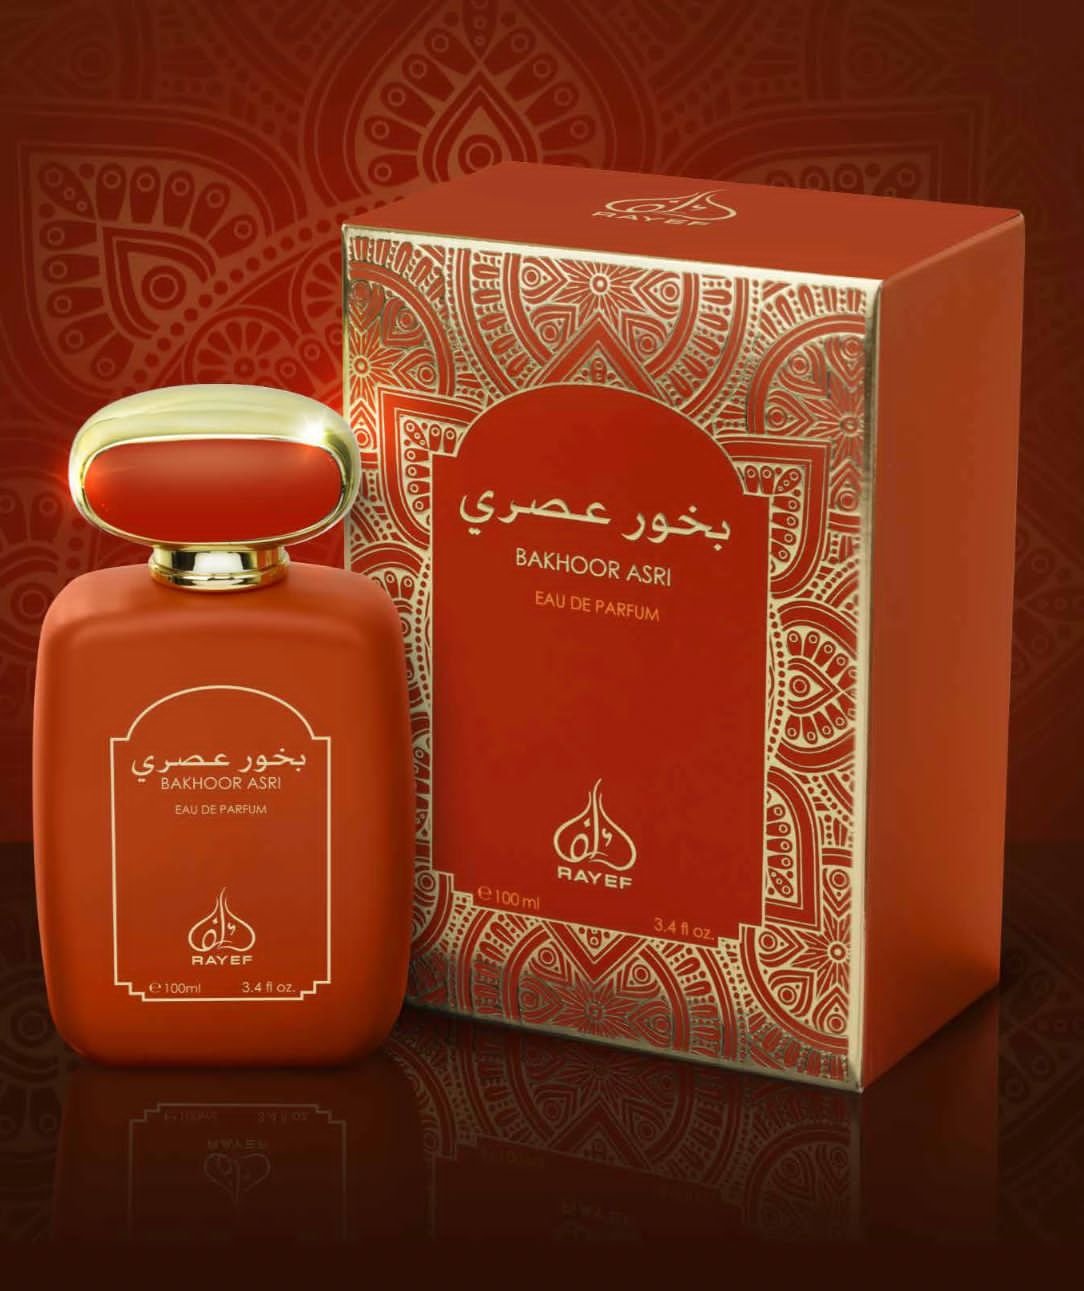 Long Lasting RAYEF Oriental Fragrance Eau De Perfum will keep you feeling fresh all day long. Suitable for use by both Men & Women. Imported directly from UAE. RAYEF Bakhoor Asri Perfume is Blend of Woody, Amber & Vanilla Fragrance. Bakhoor Asri is a warm aroma mixed with spicy, woody and smoky notes. It is a pleasing fragrance that’s suitable for both indoor and outdoor occasions. For a Premium Luxury and Long Lasting 100ml perfume for Men & Women, choose Rayef.